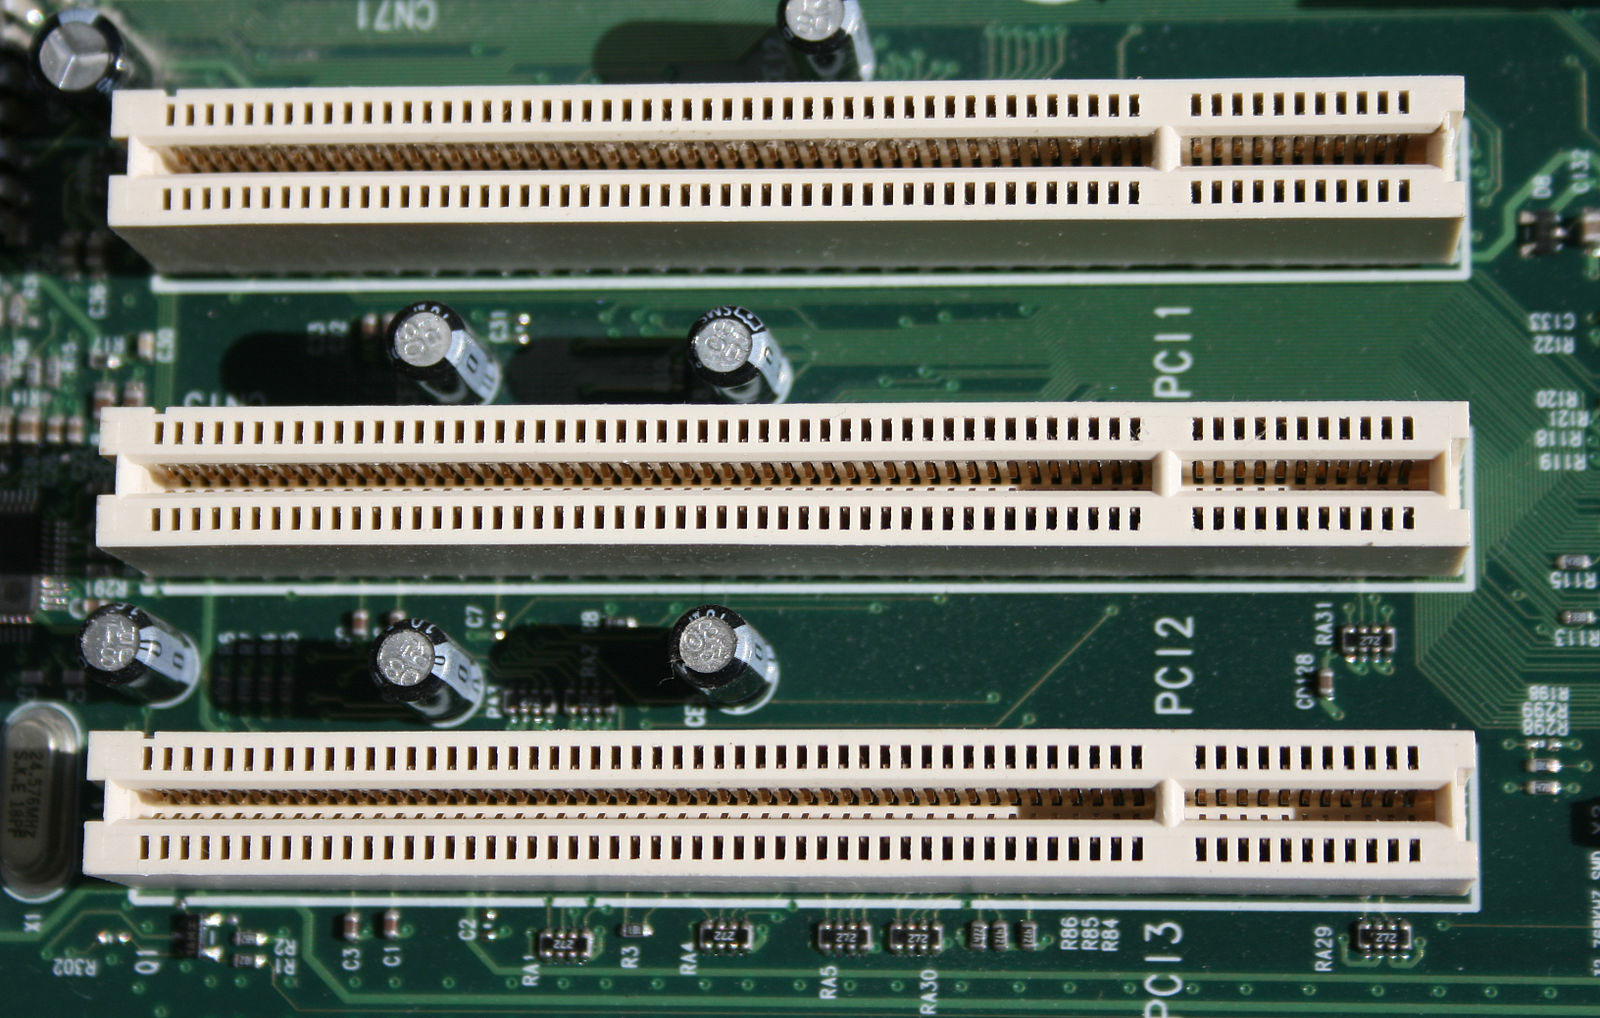 PCI slots for attaching RAM to a motherboard